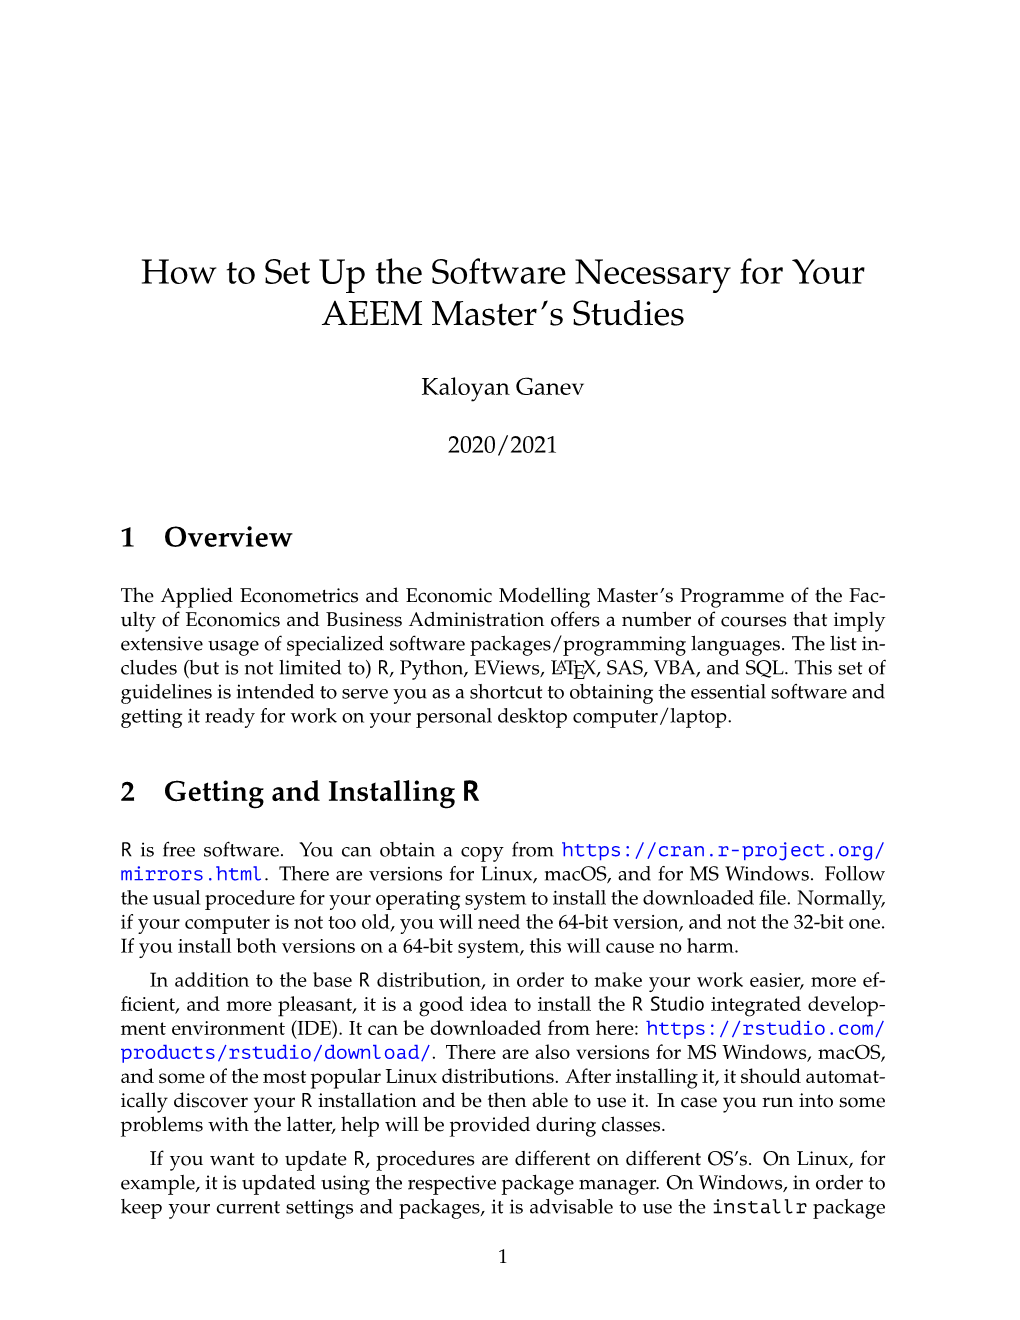 How to Set up the Software Necessary for Your AEEM Master's